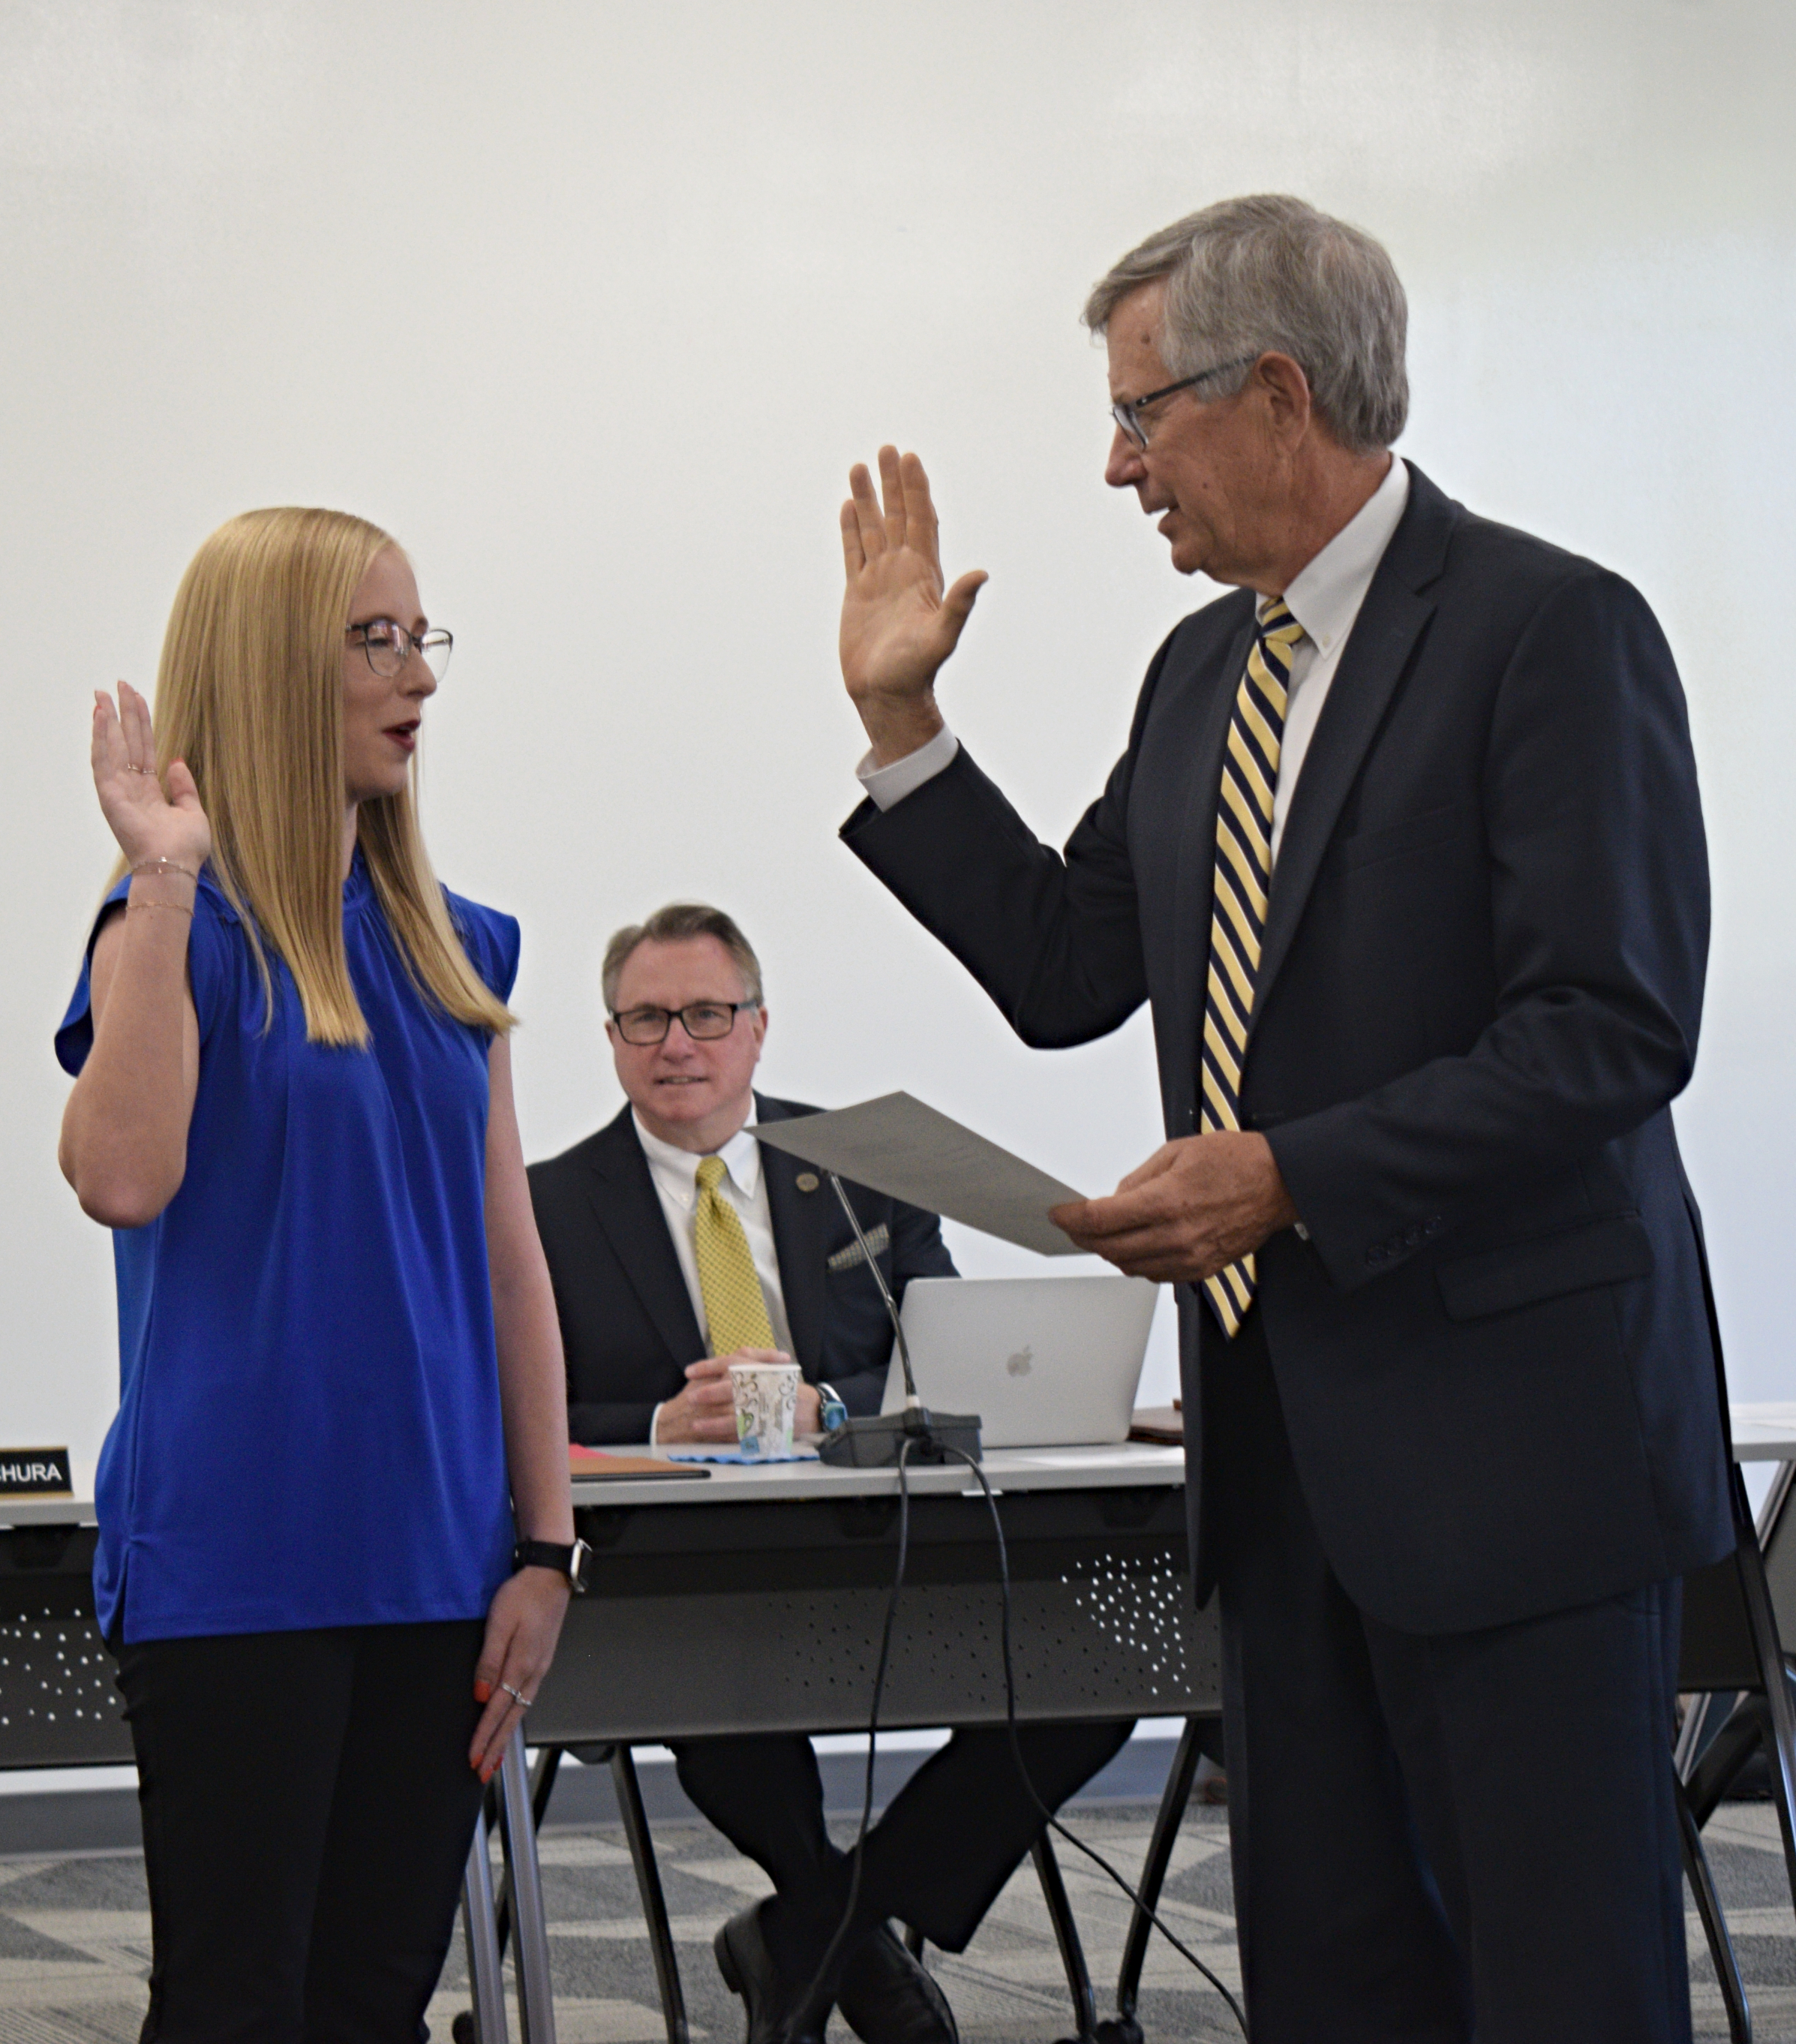 Student Trustee Gayle Baugh holds her hand up as she is being sworn in by the University attorney Brent Stuckey.